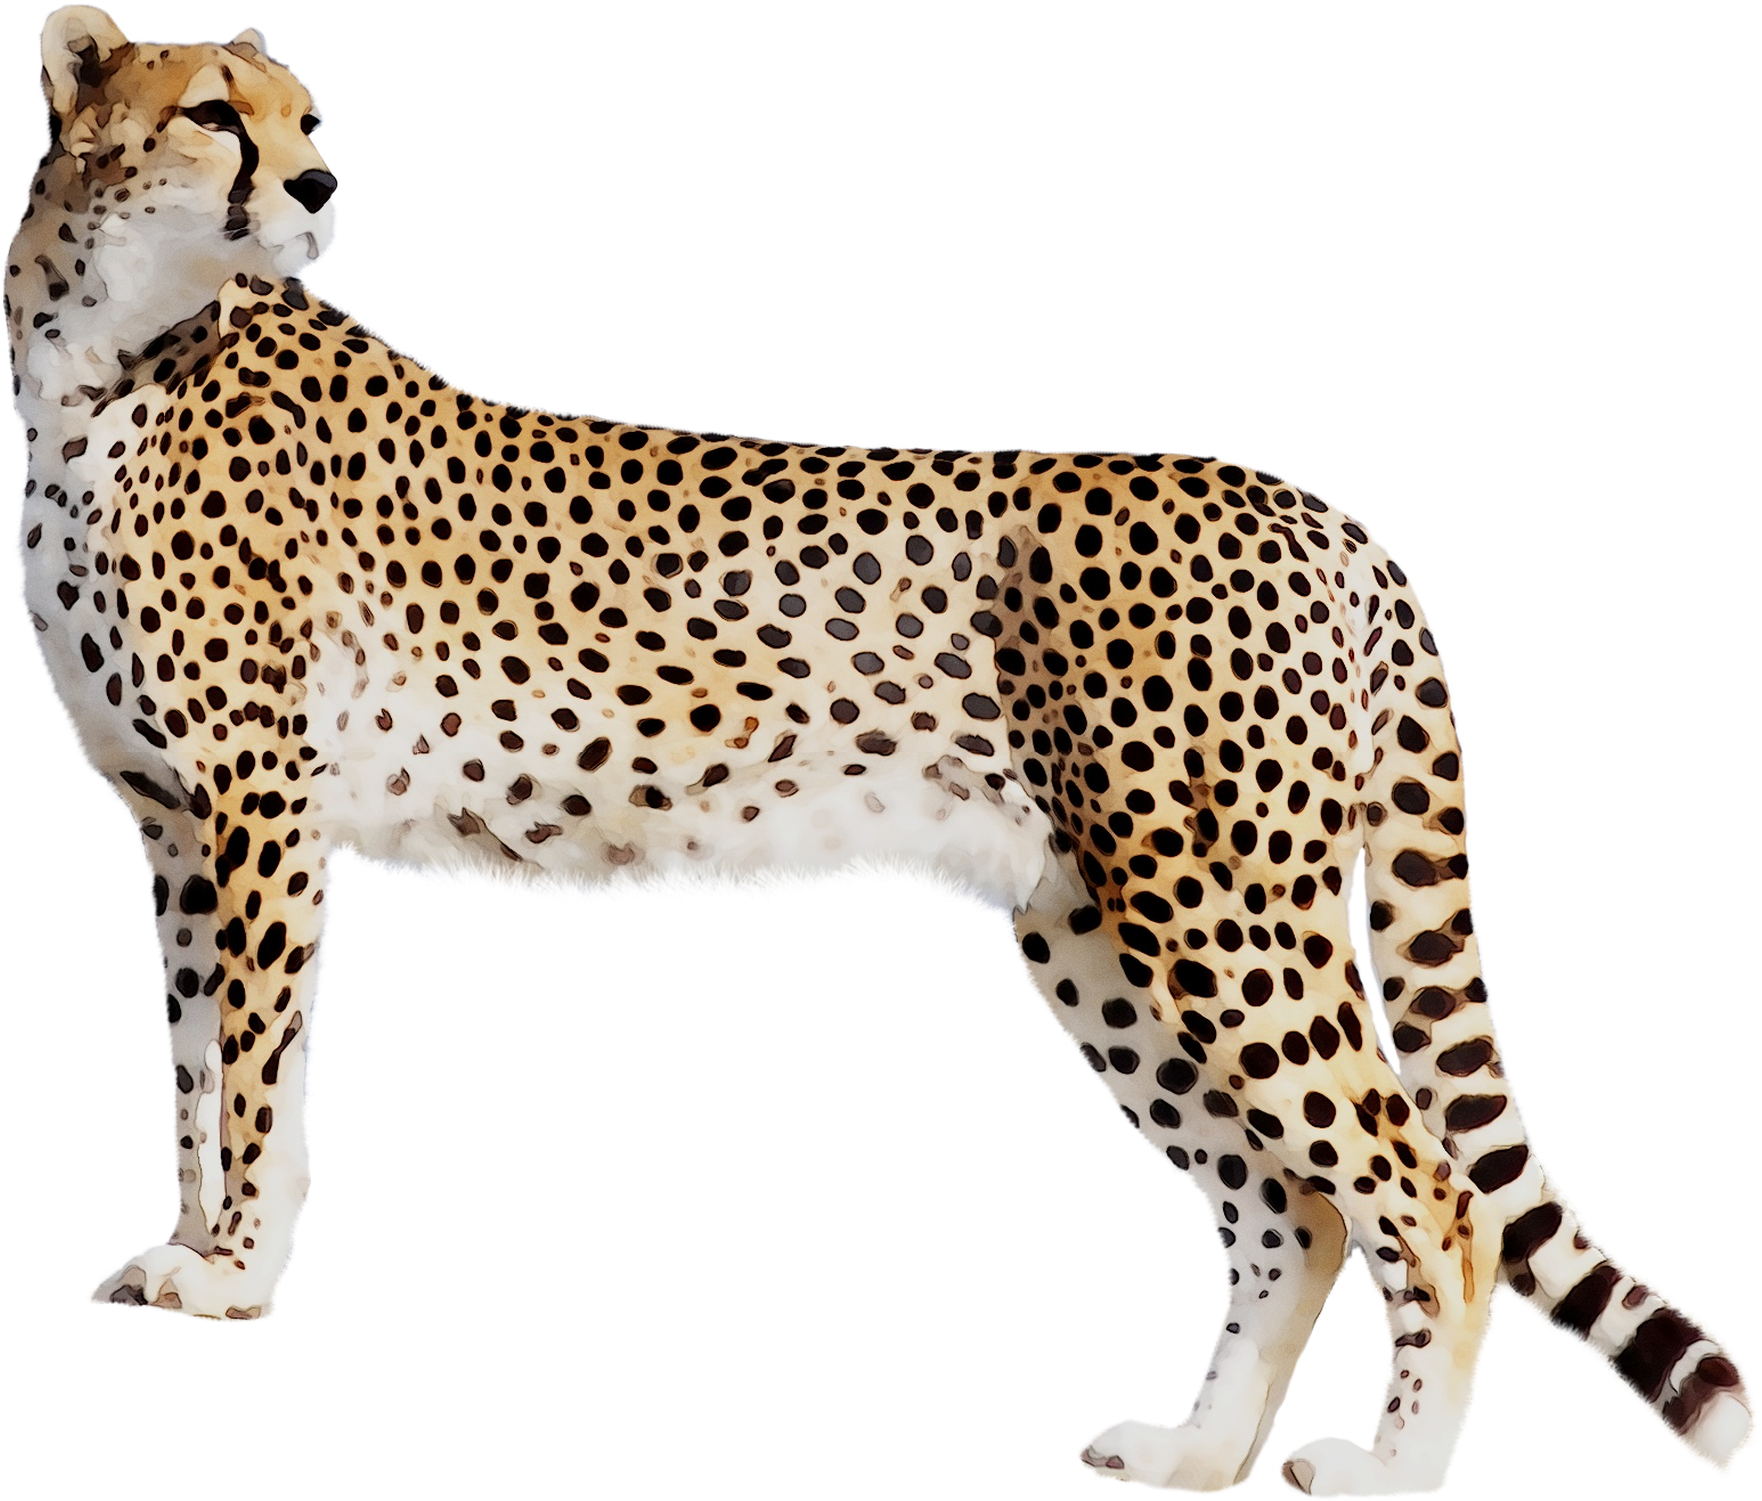 A Cheetah Standing On A Black Background